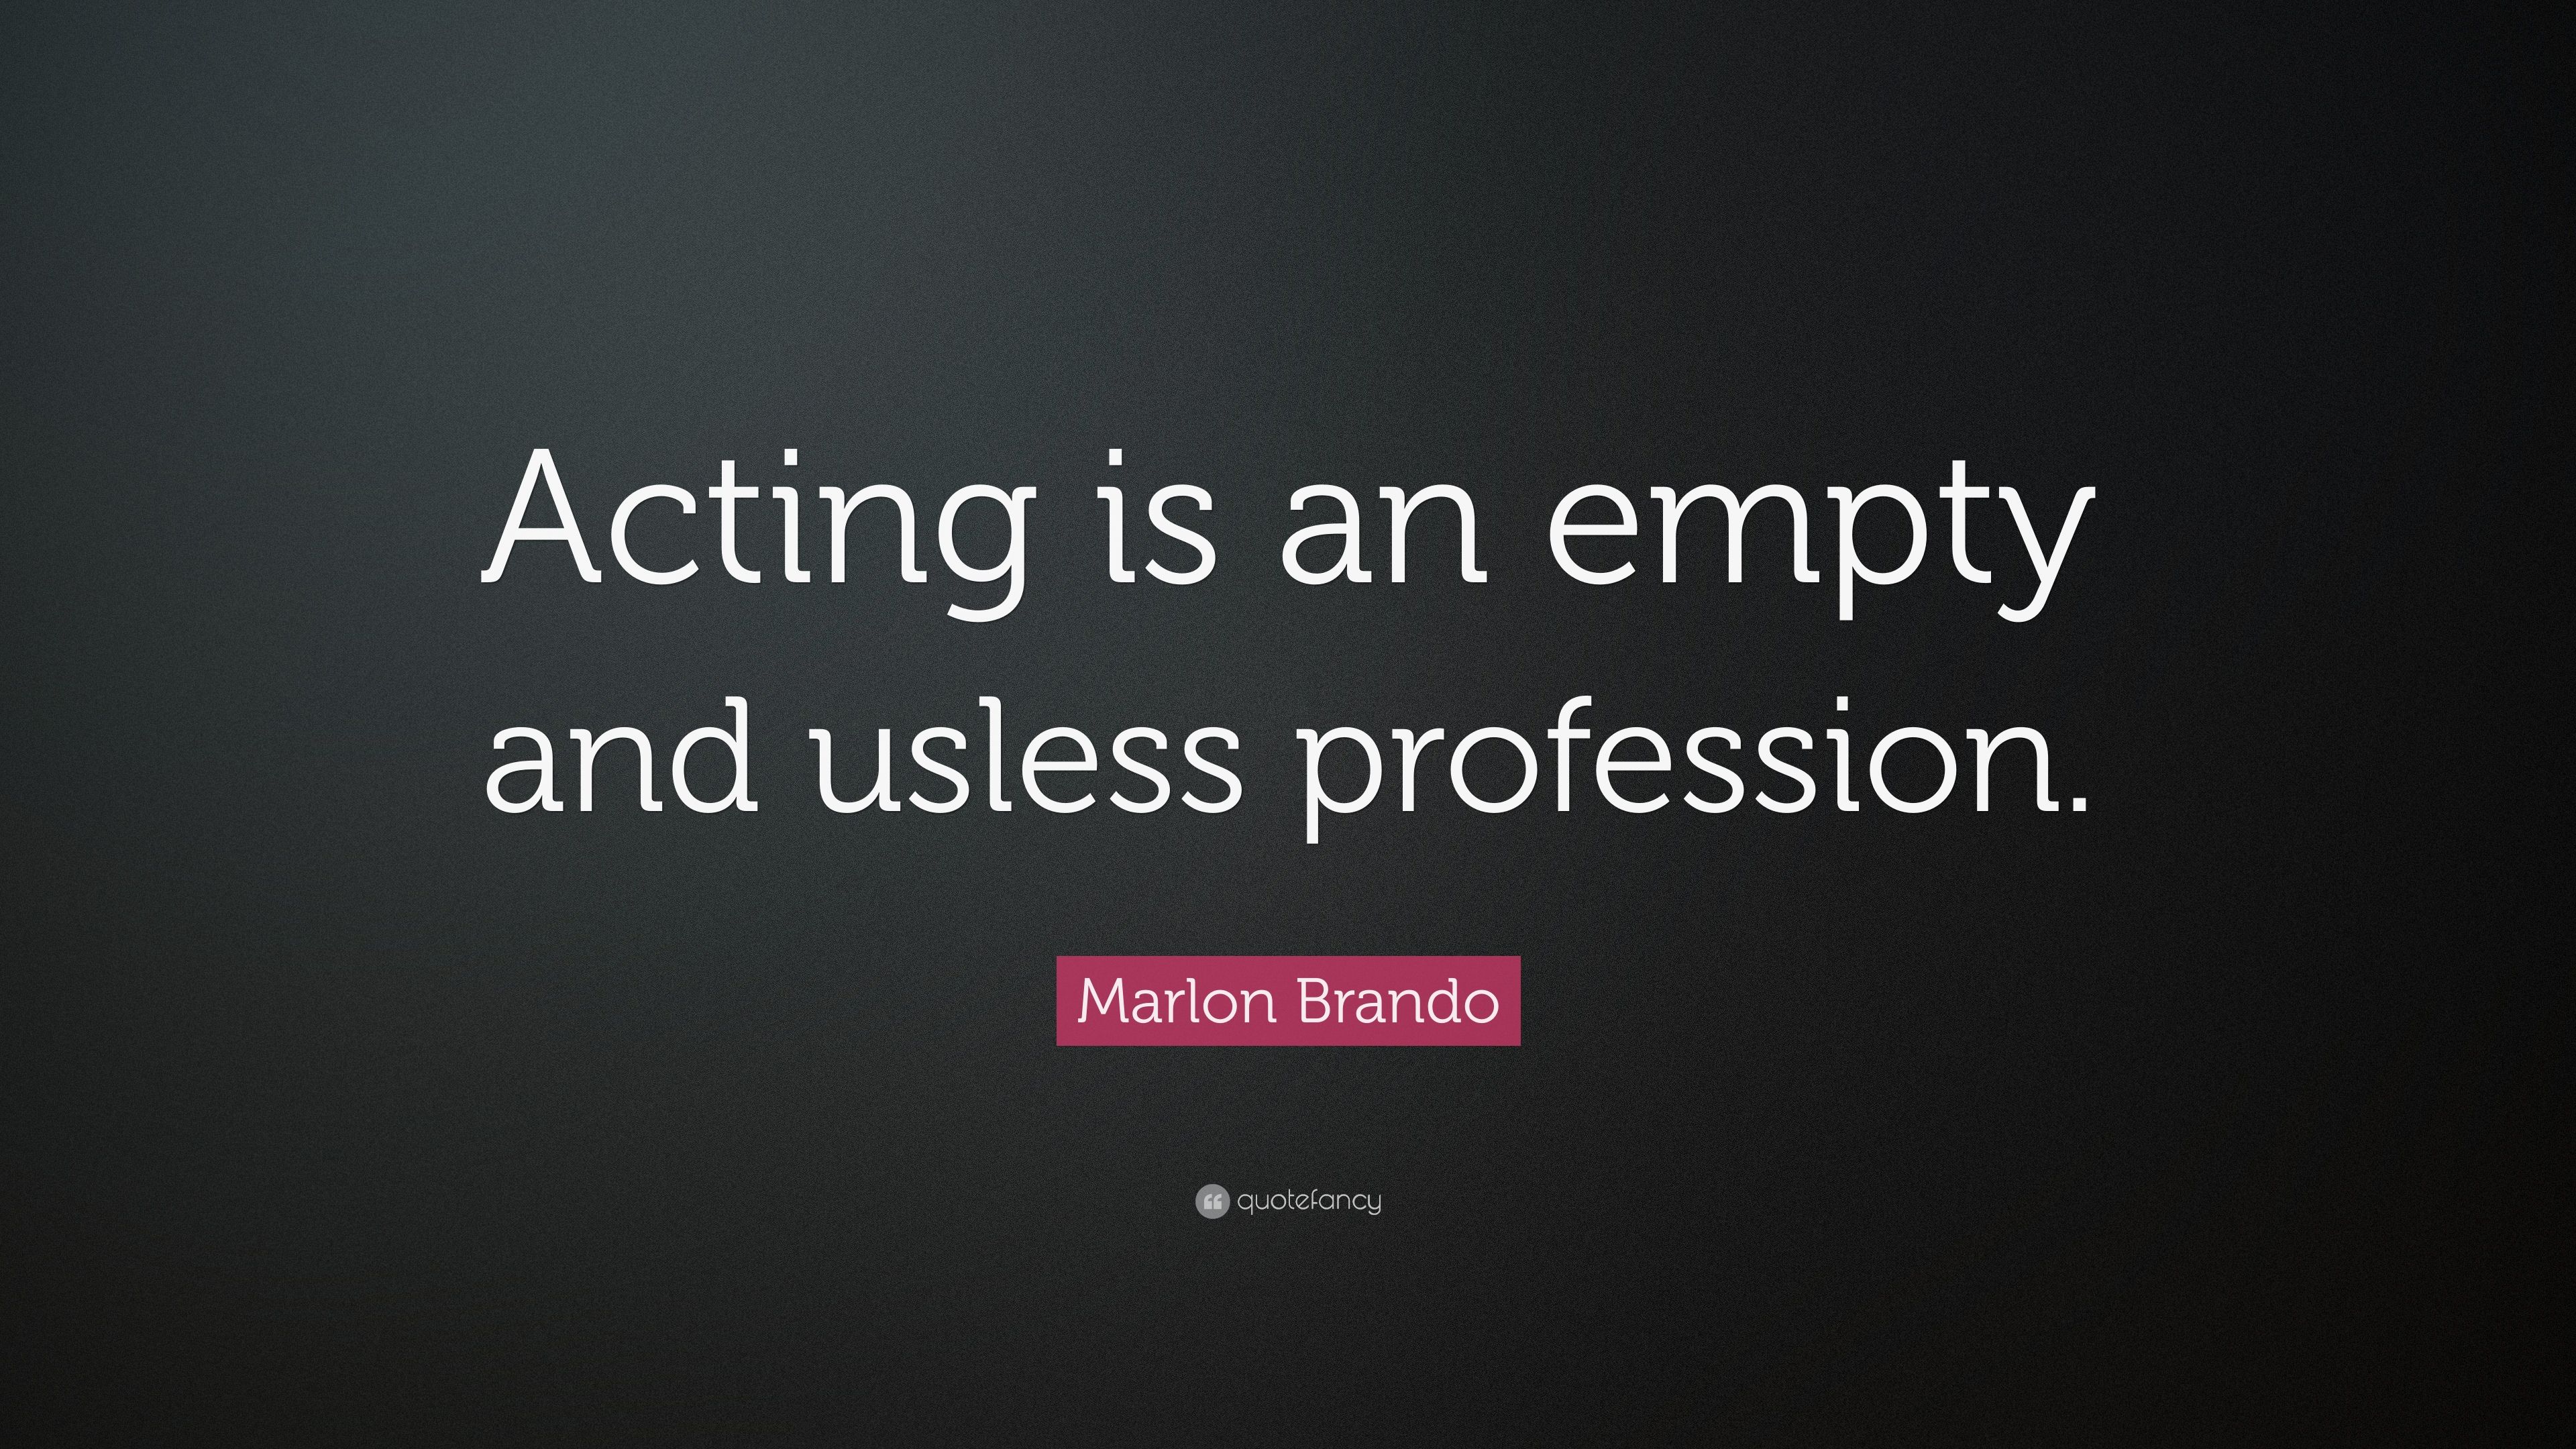 Marlon Brando Quote: “Acting is an empty and usless profession